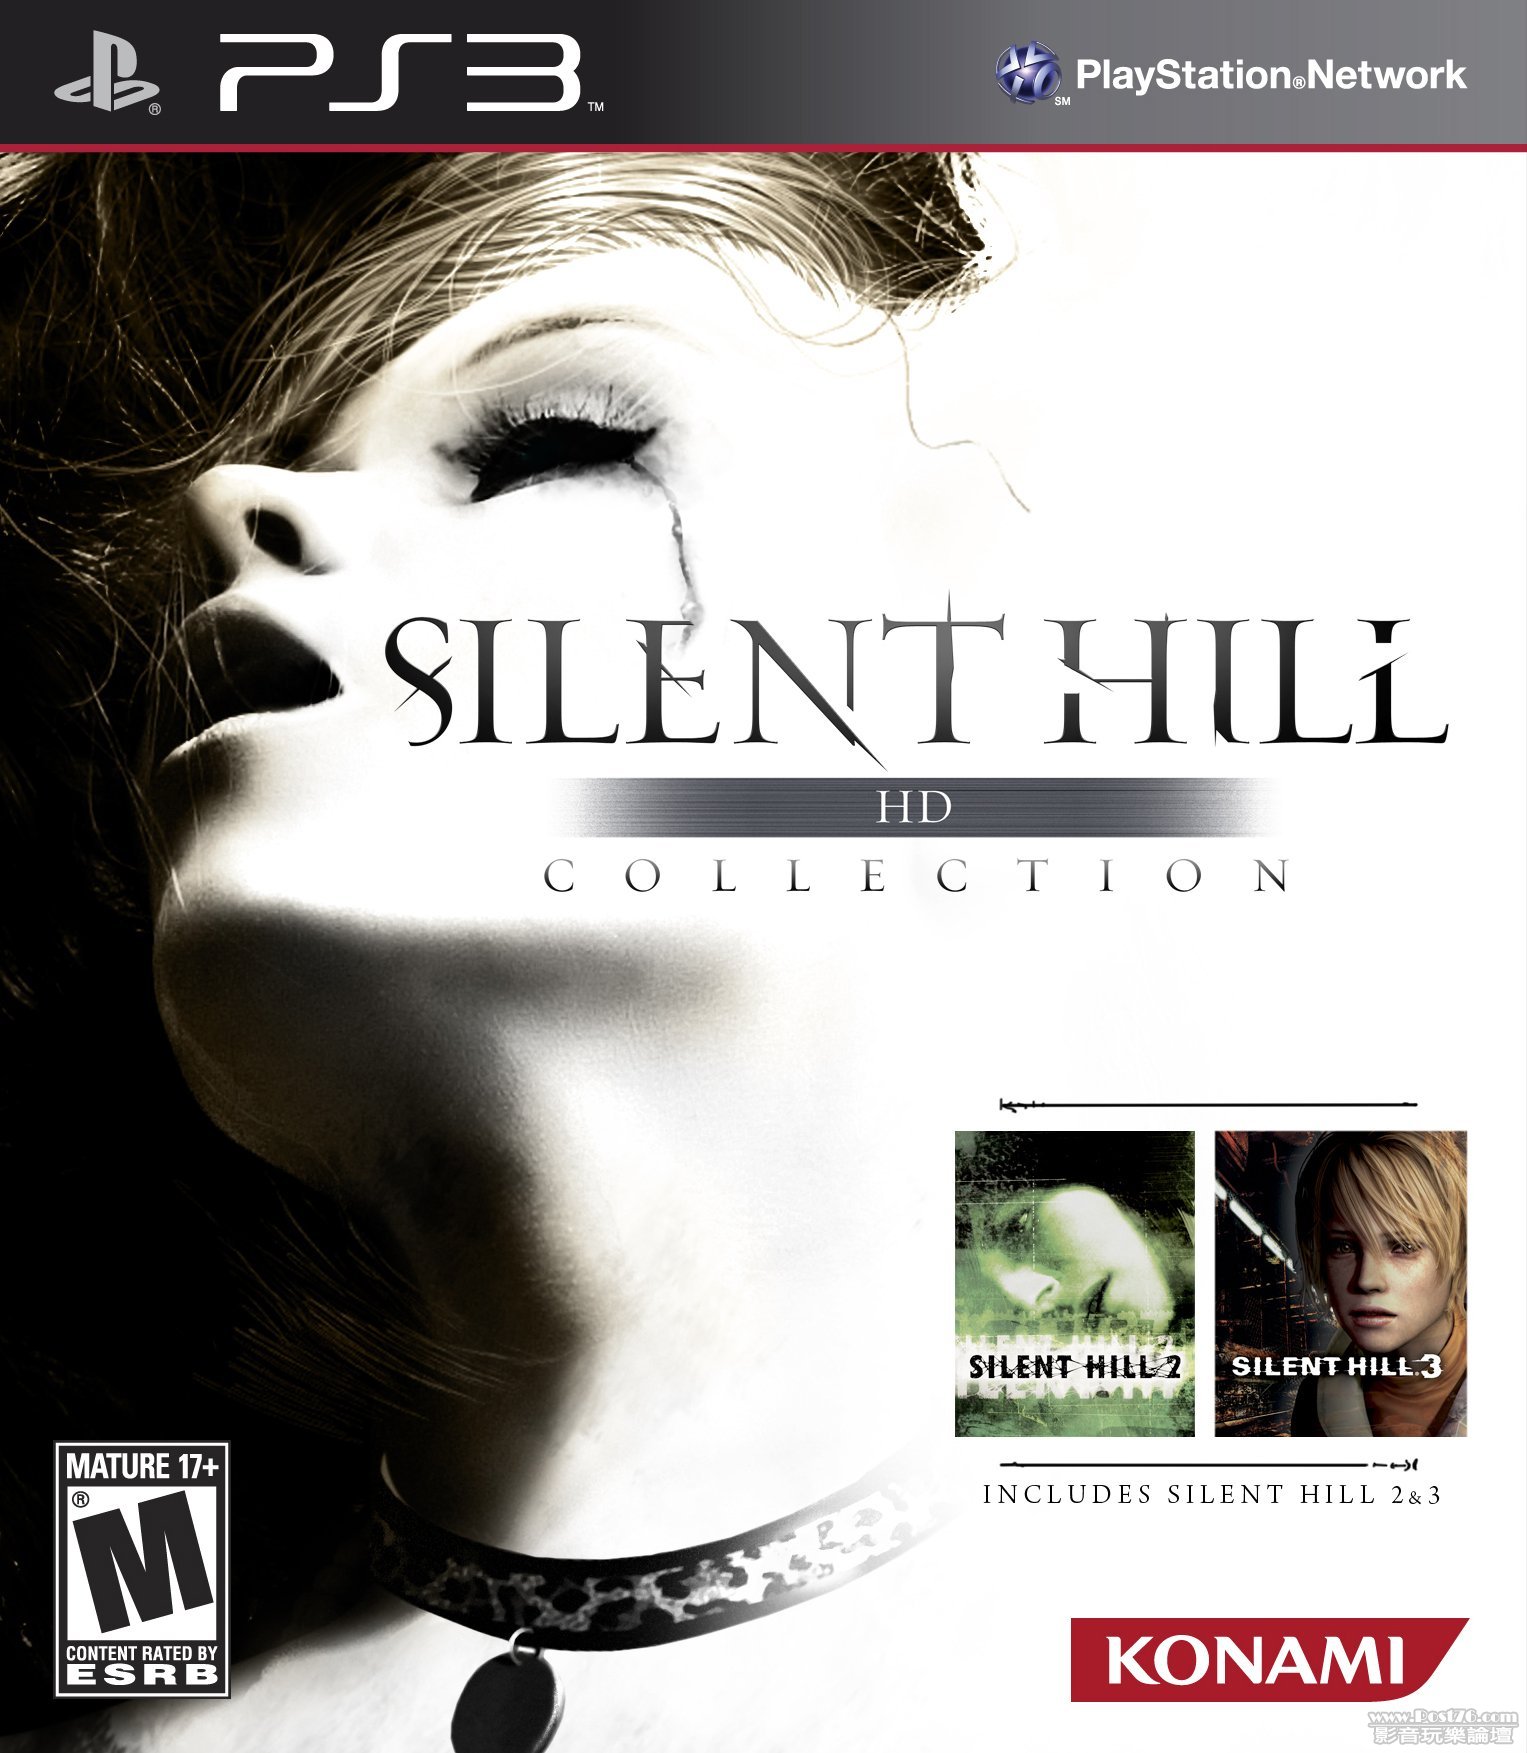 Silent-Hill-HD-Collection_2011_08-27-11_001.jpg